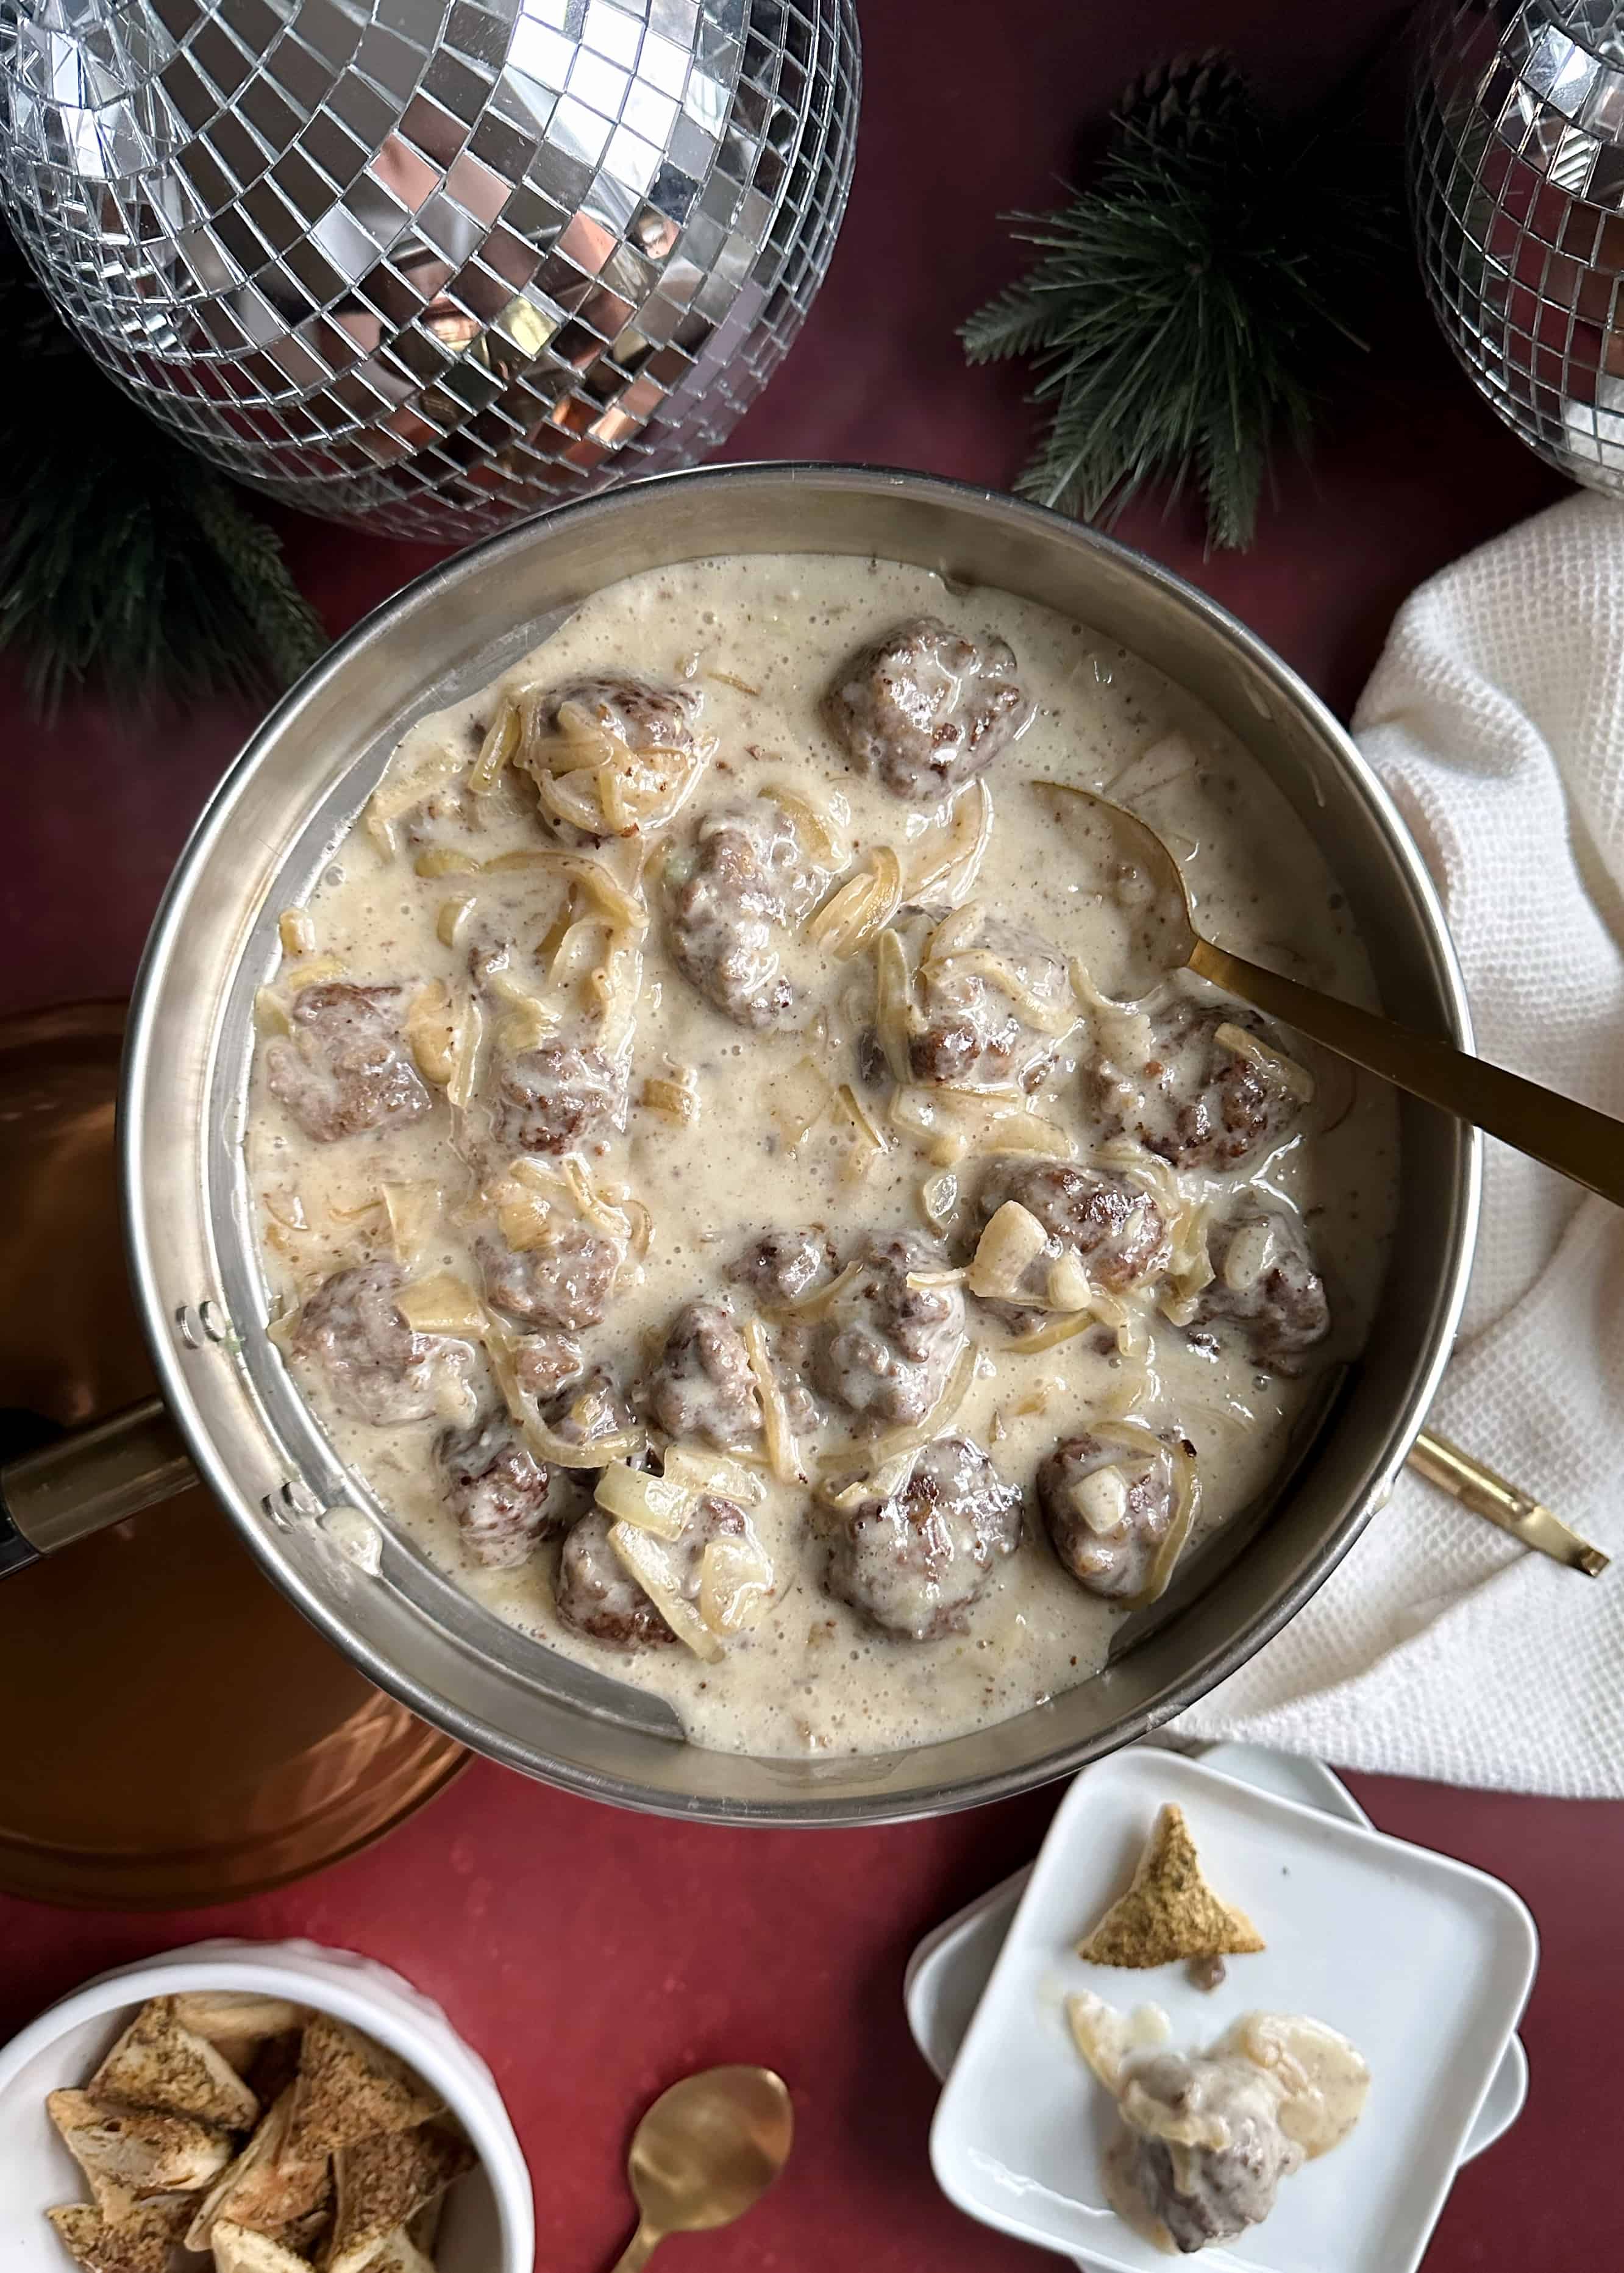 vidalia onion party meatballs with spoon and serving dish